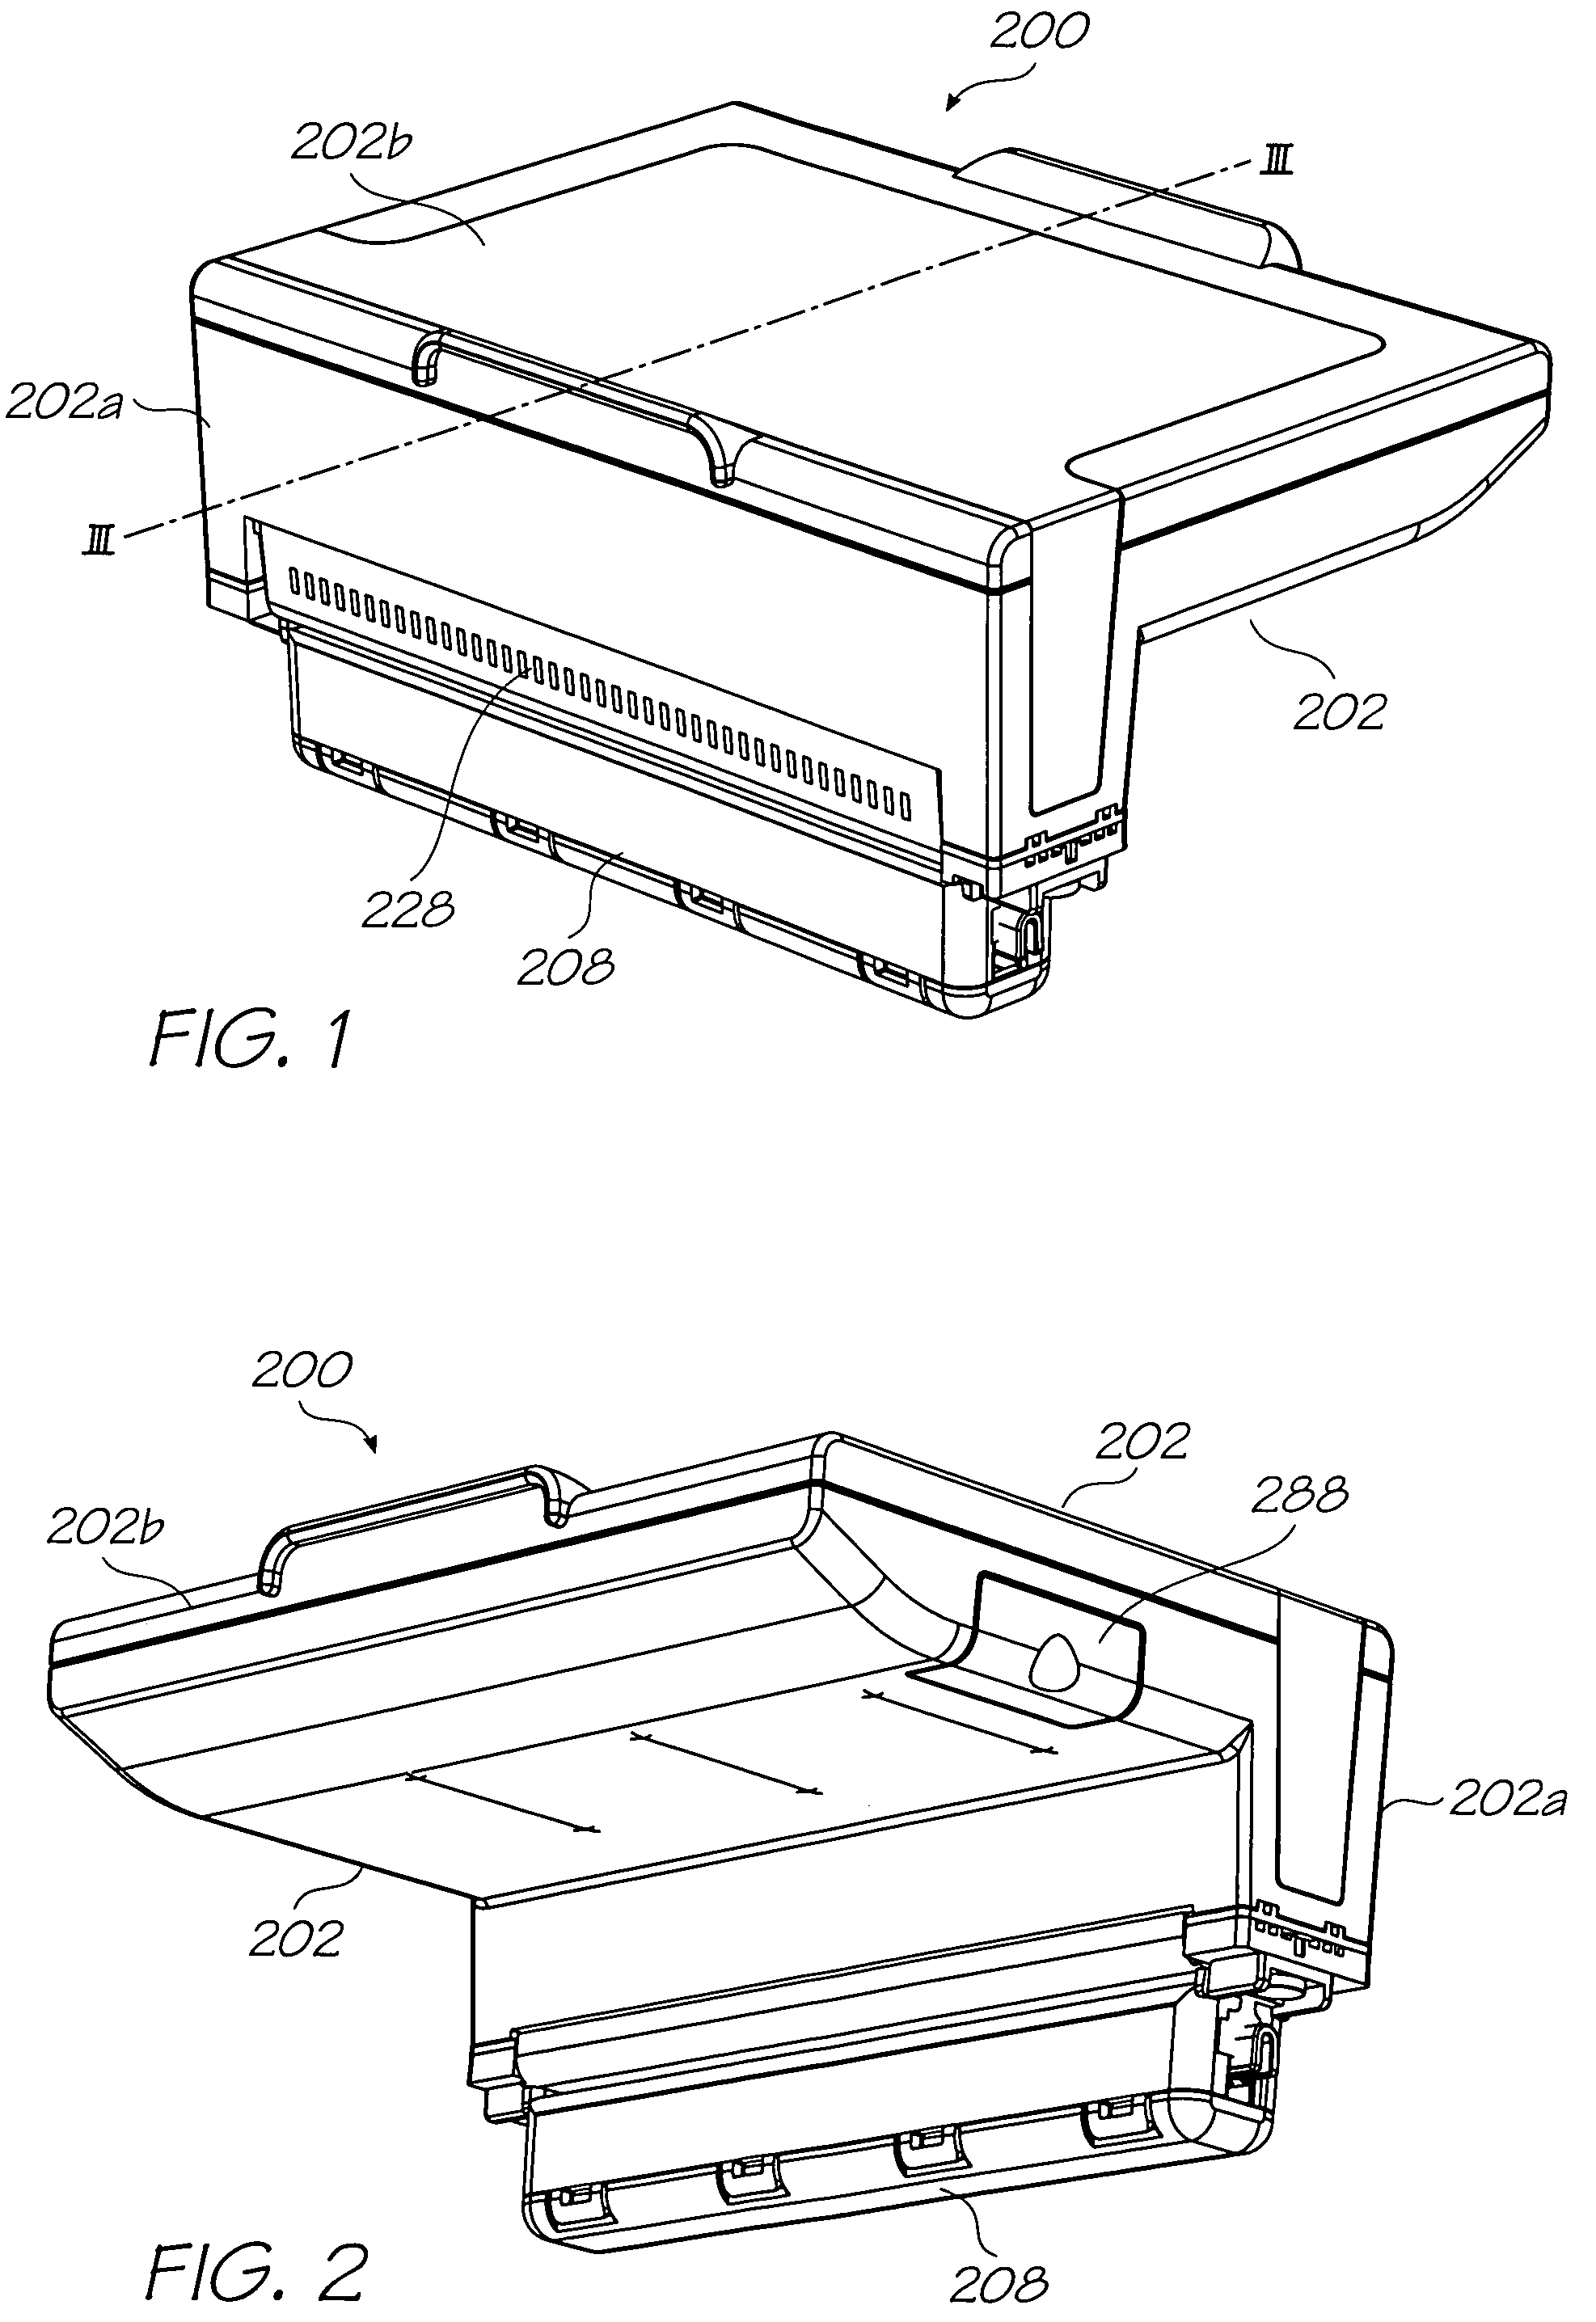 Self-referencing printhead assembly